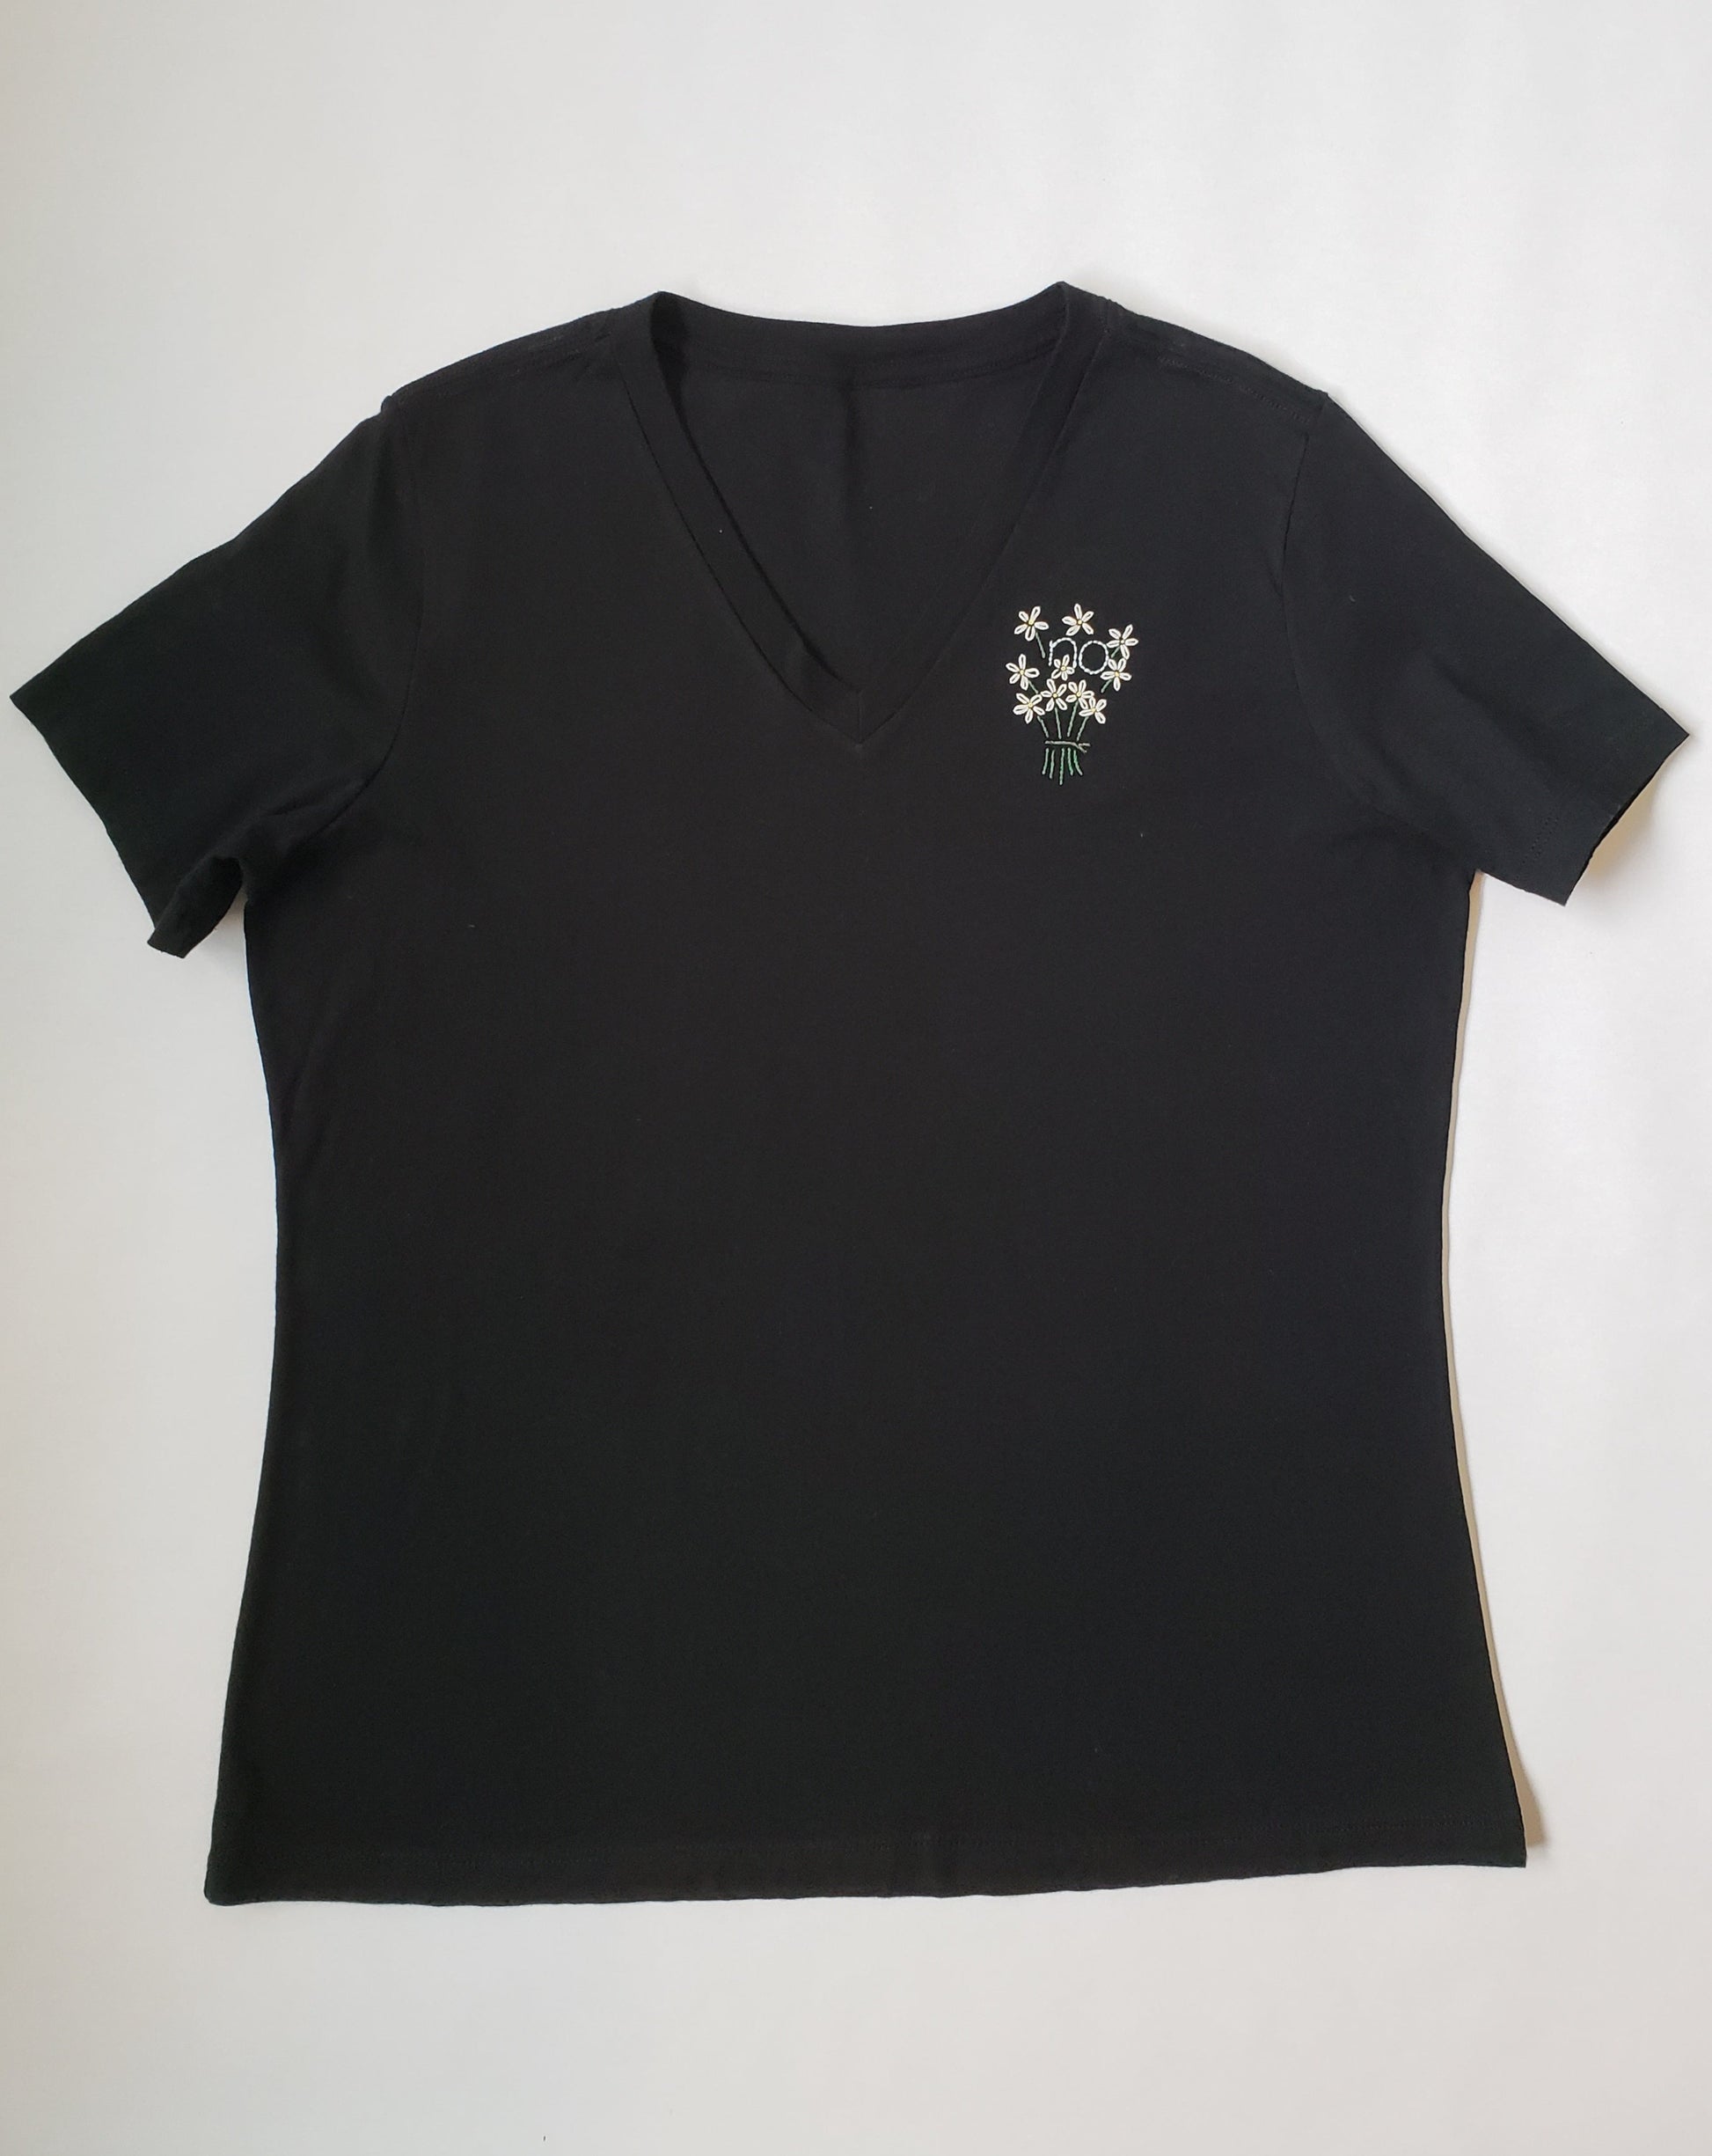 A black v neck tee with a small bouquet of hand embroidered flowers on the left side. The bouquet has 10 daisies and "no" embroidered in light blue in a backstitch in the middle of the bouquet. The flowers are held together by a small grey tie.